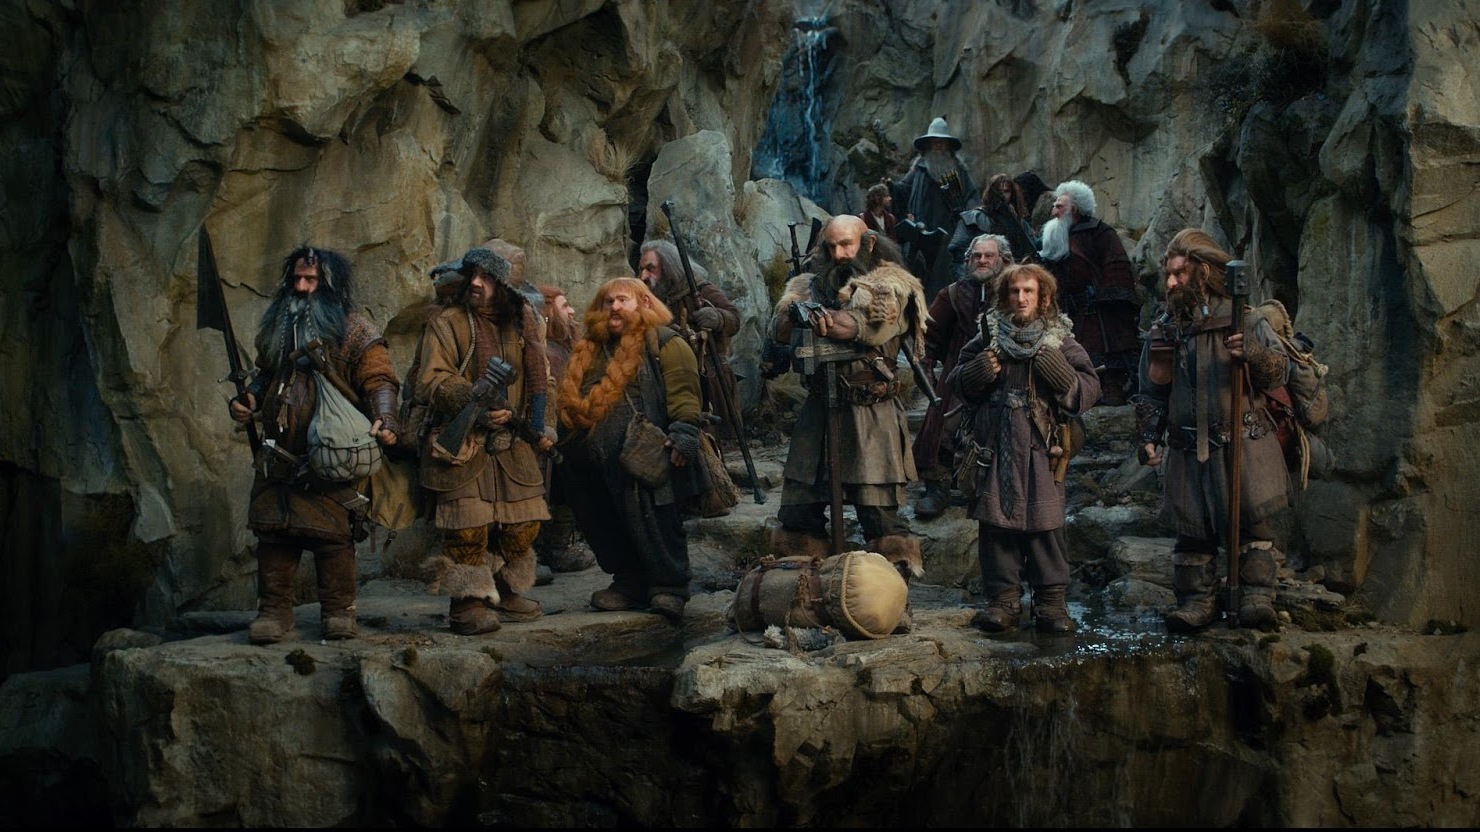 Officiële synopsis onthuld voor 'The Hobbit: The Battle of the Five Armies'